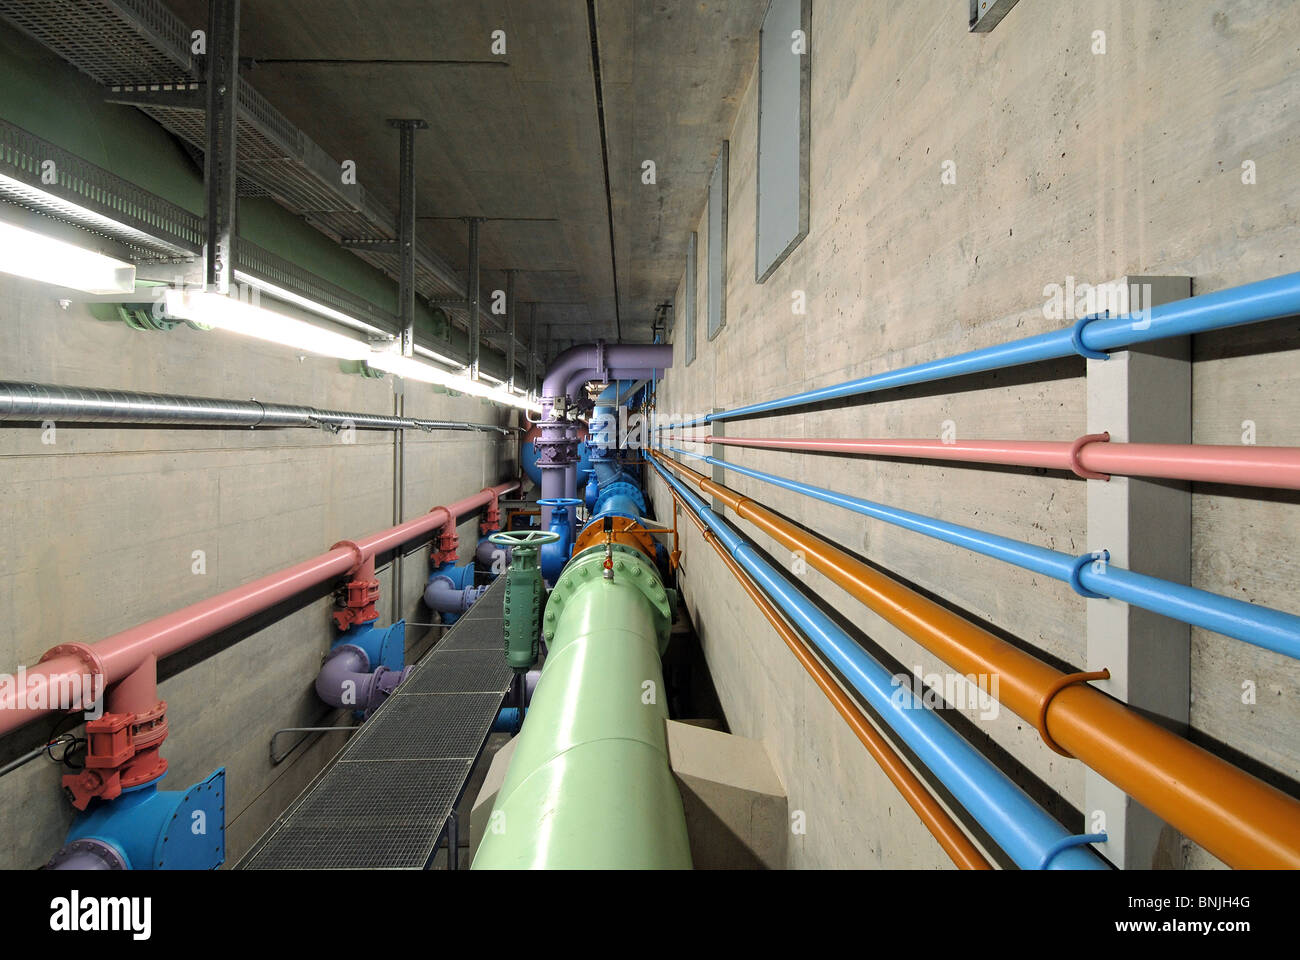 Water tube industry pipe piping infrastructure indoors indoor inside engineering supply maintenance pipes Stock Photo